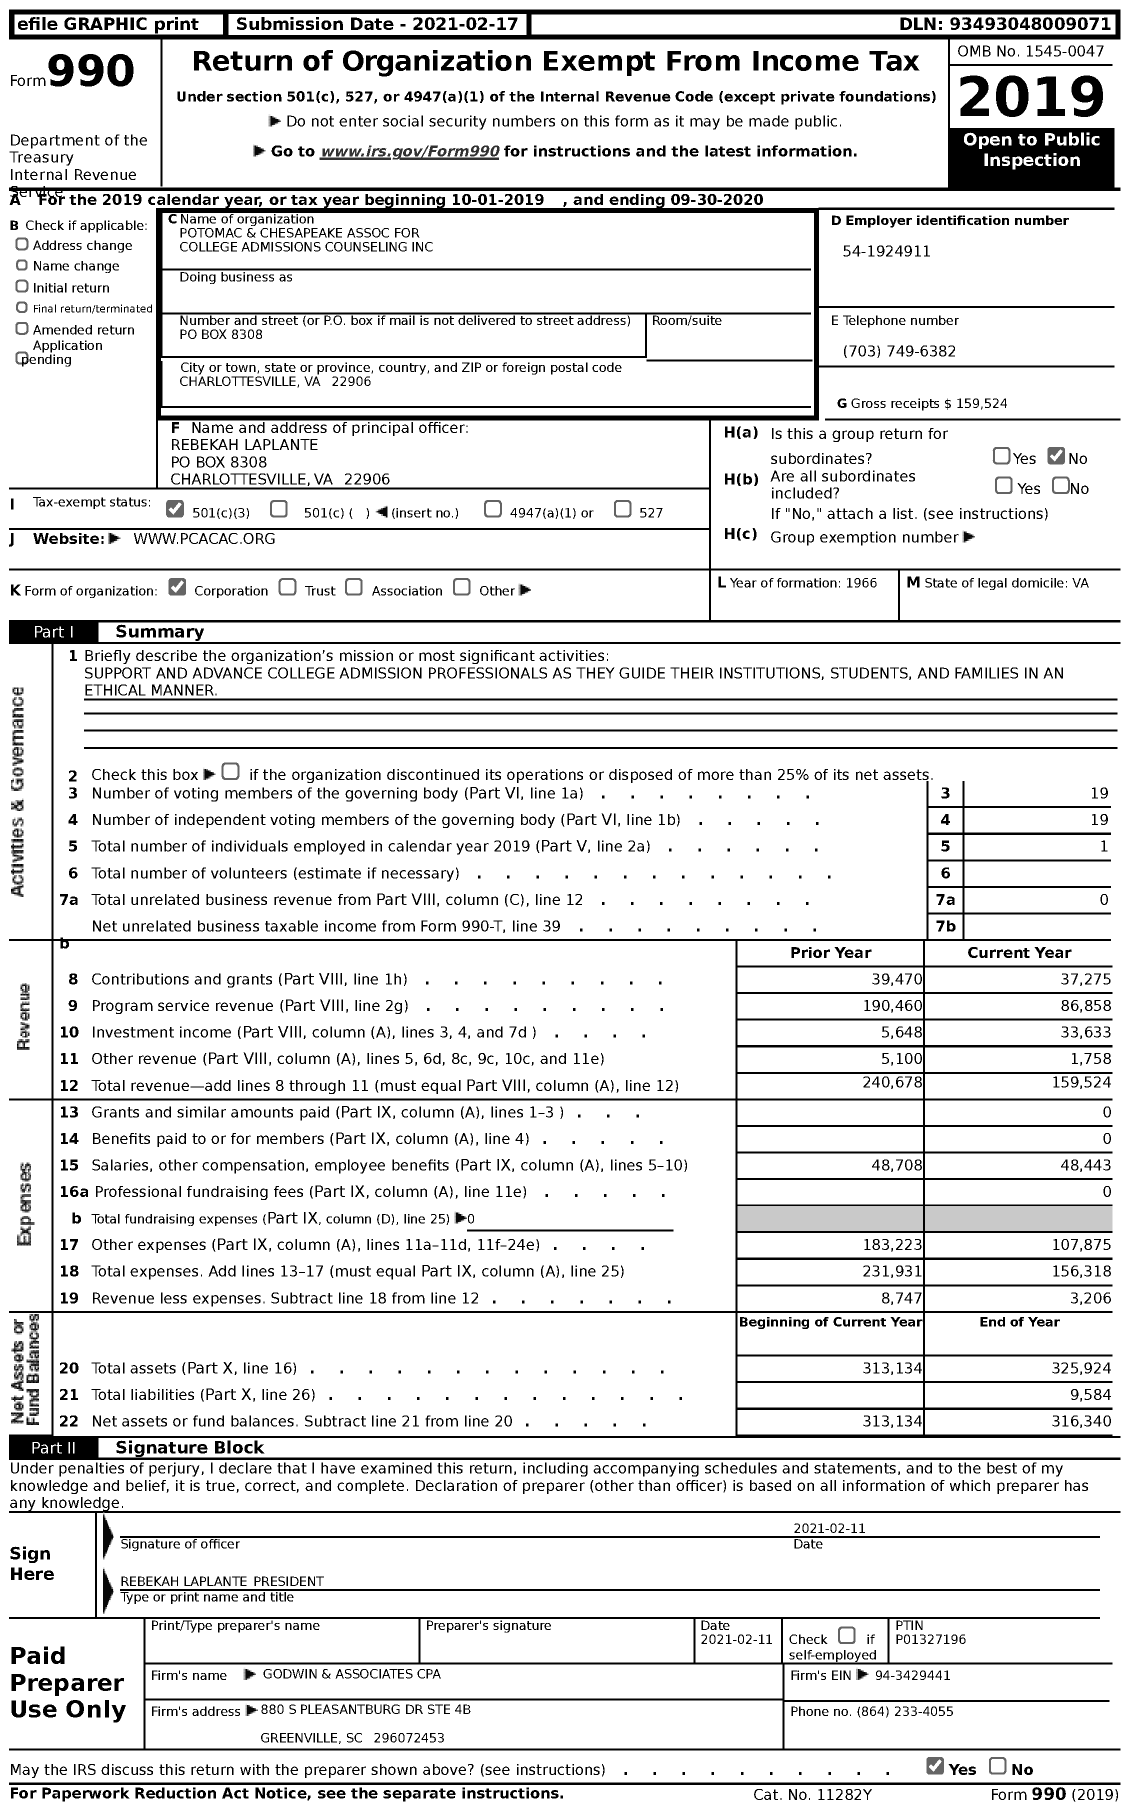 Image of first page of 2019 Form 990 for Potomac and Chesapeake Association for College Admissions Counseling